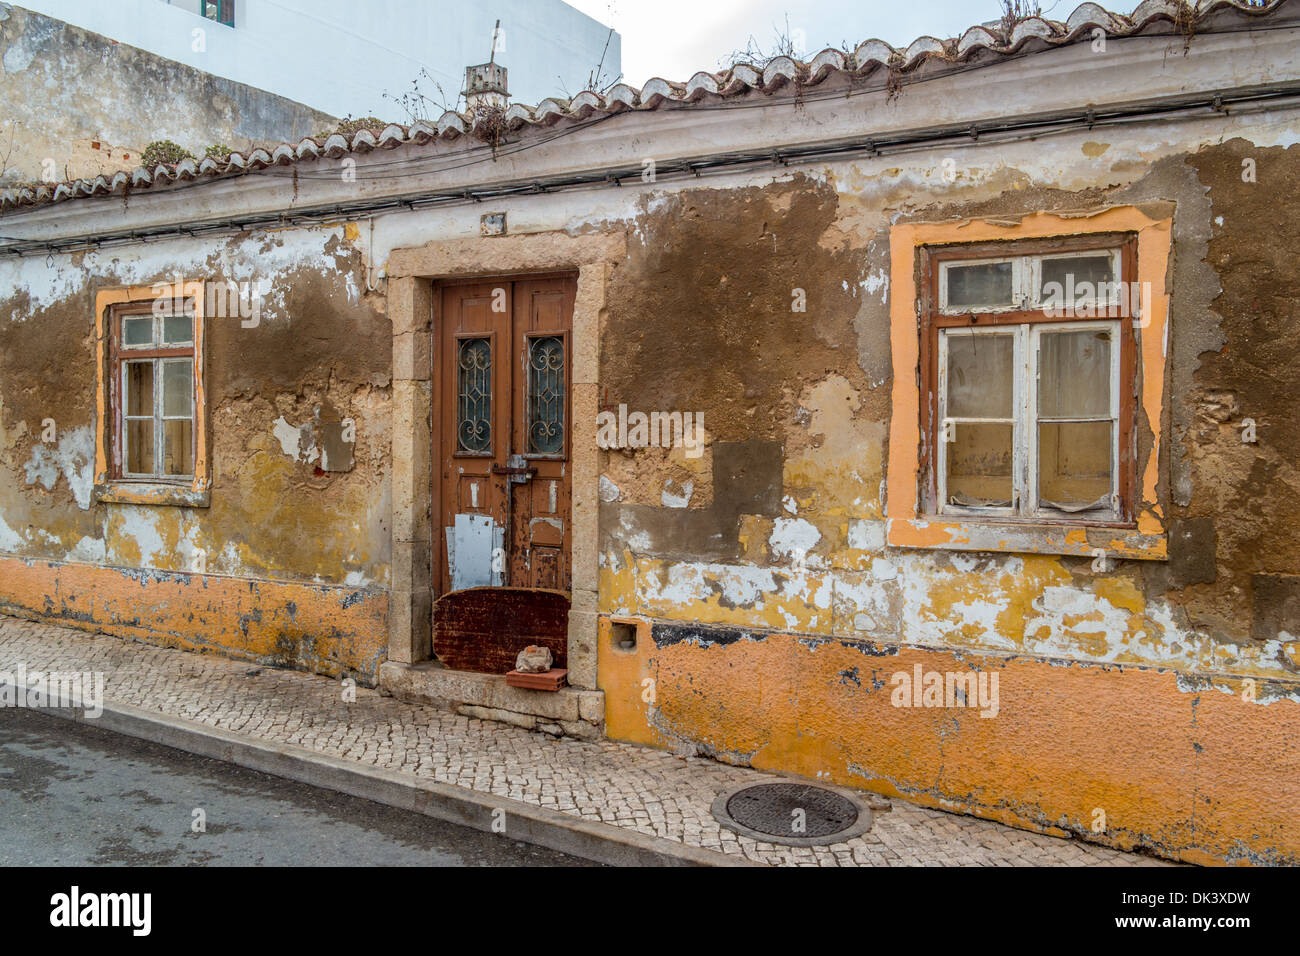 Old building in a state of dilapidation with paint and cement peeling off the walls Stock Photo